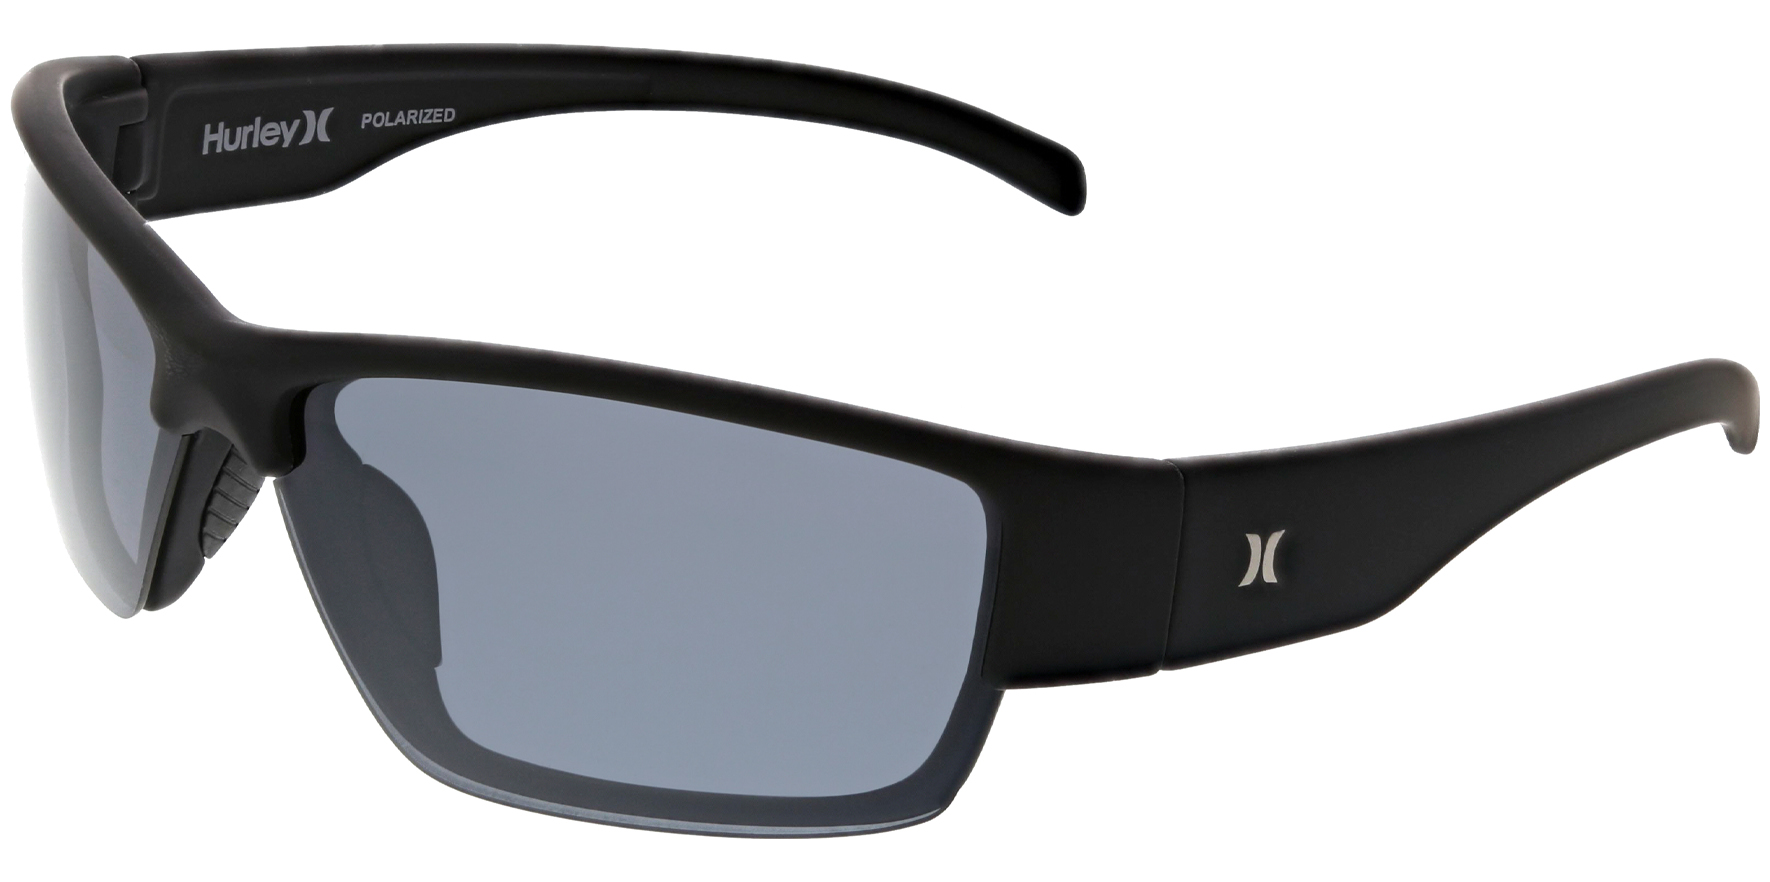 Hurley Men's & Women's Polarized Sunglasses (various styles/colors) $20 + Free Shipping